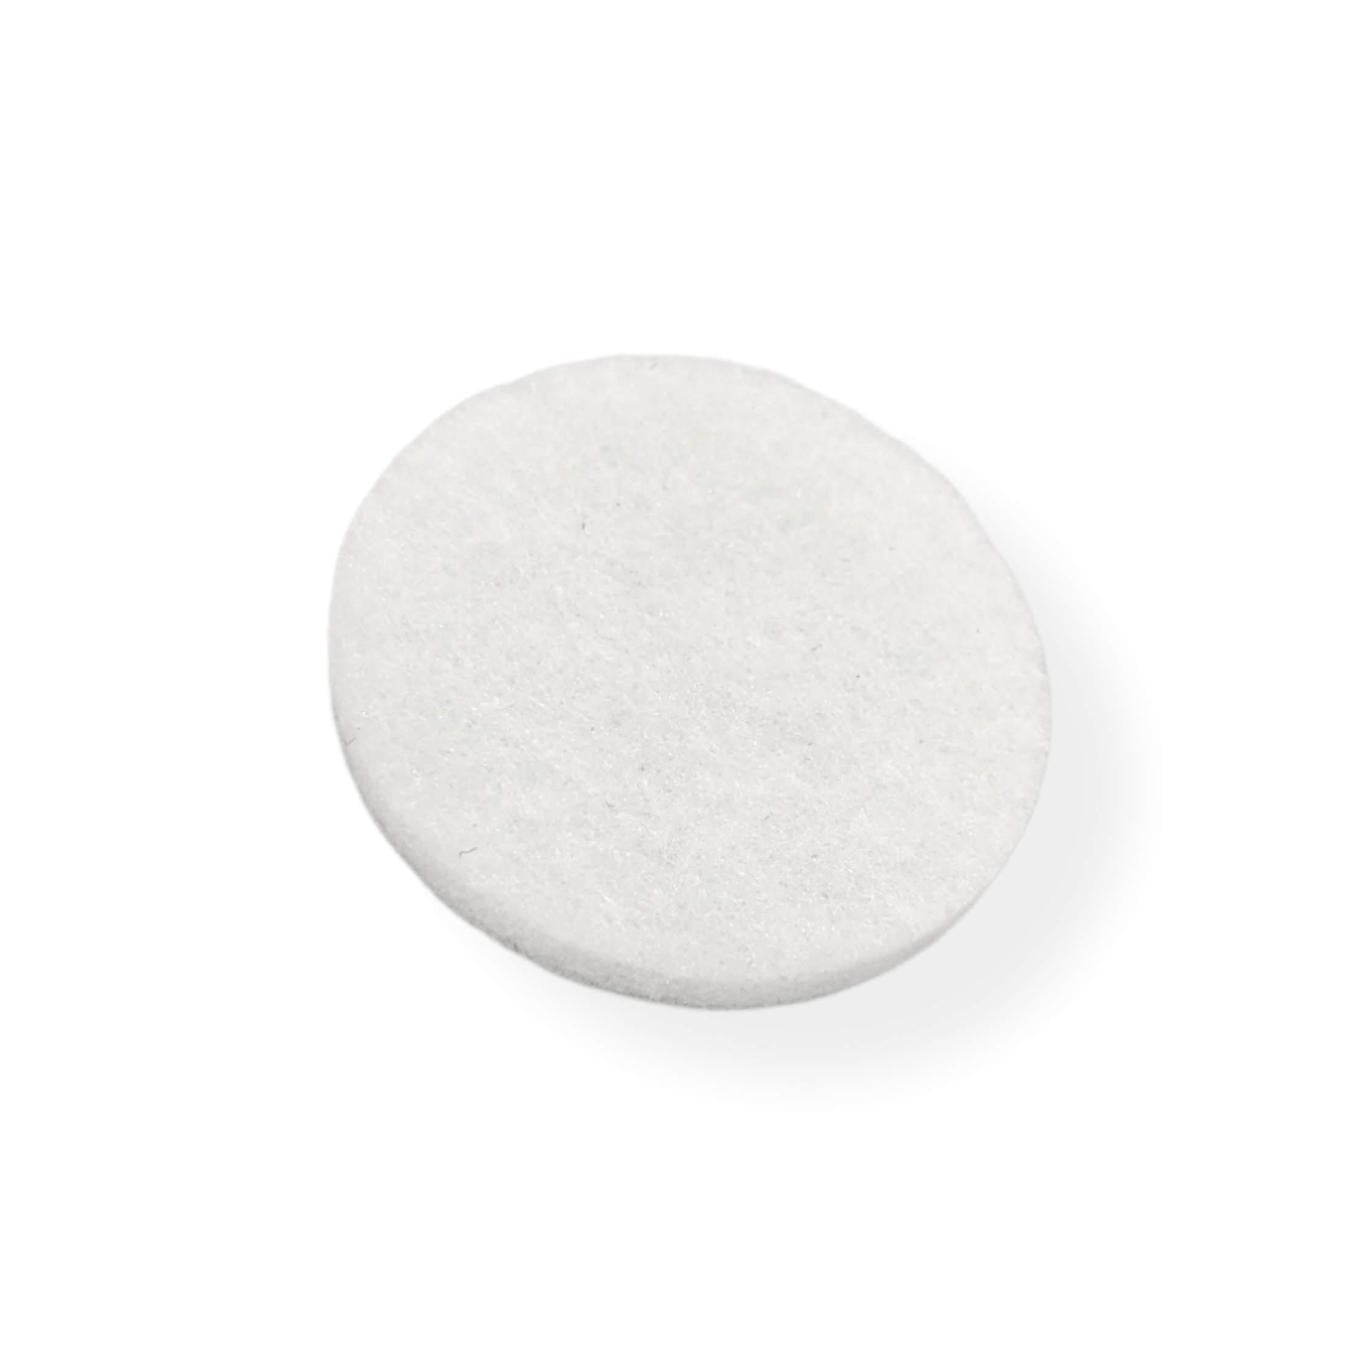 Felt Pads - White Self Adhesive Stick on Felt - Round 42mm Diameter - Made in Germany - Keay Vital Parts